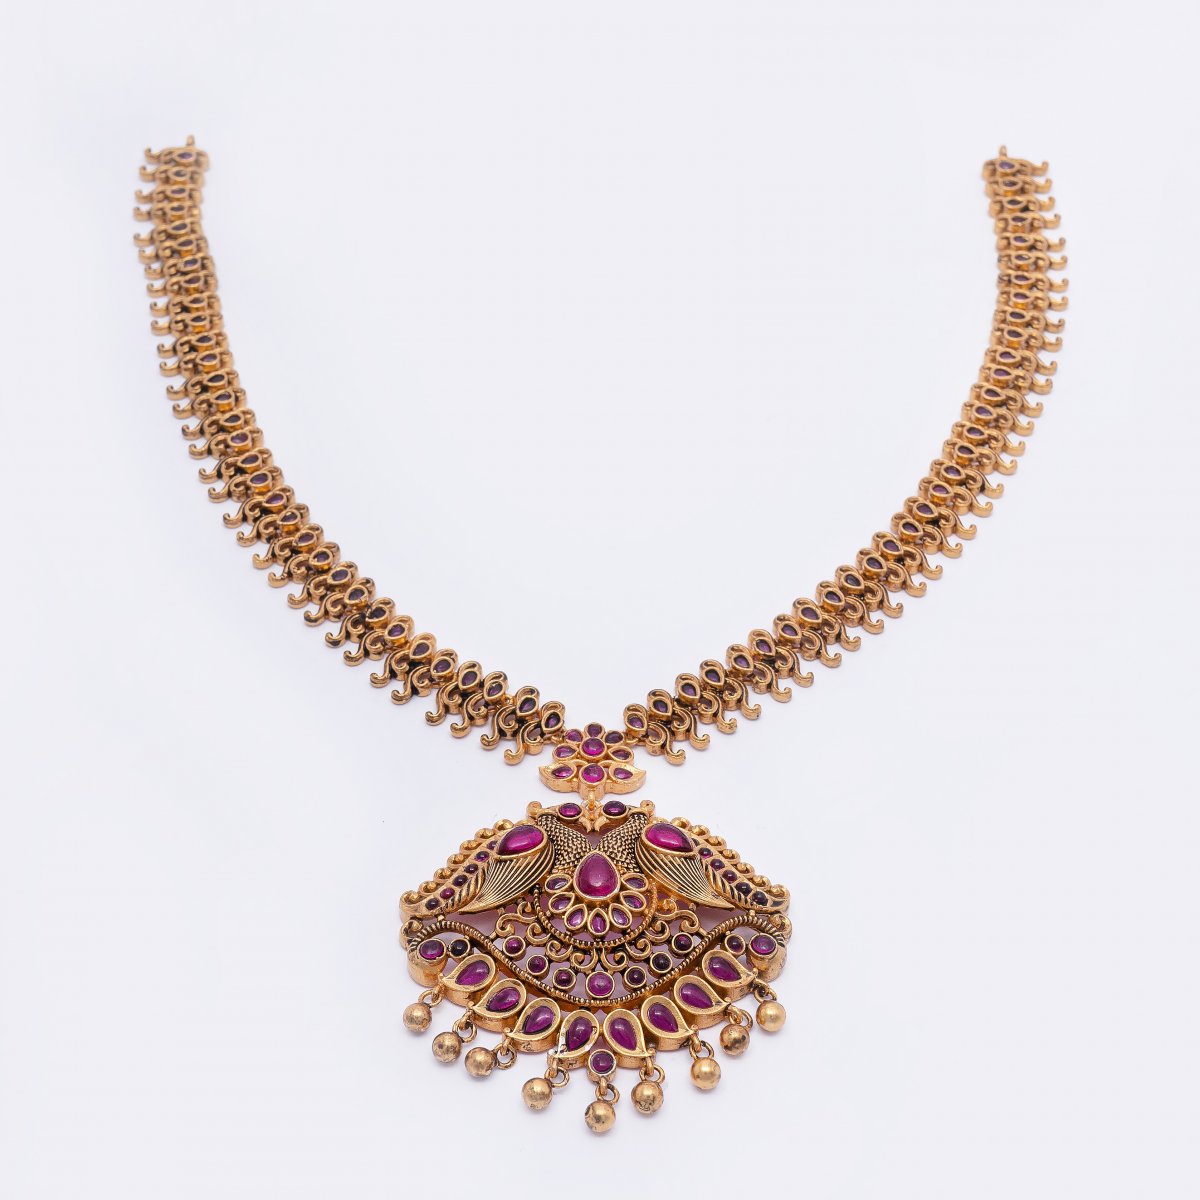 GOLD PLATED TRADITIONAL TRENDY SOUTH INDIAN PEACOCK DESIGN NECKLACE FOR WOMEN